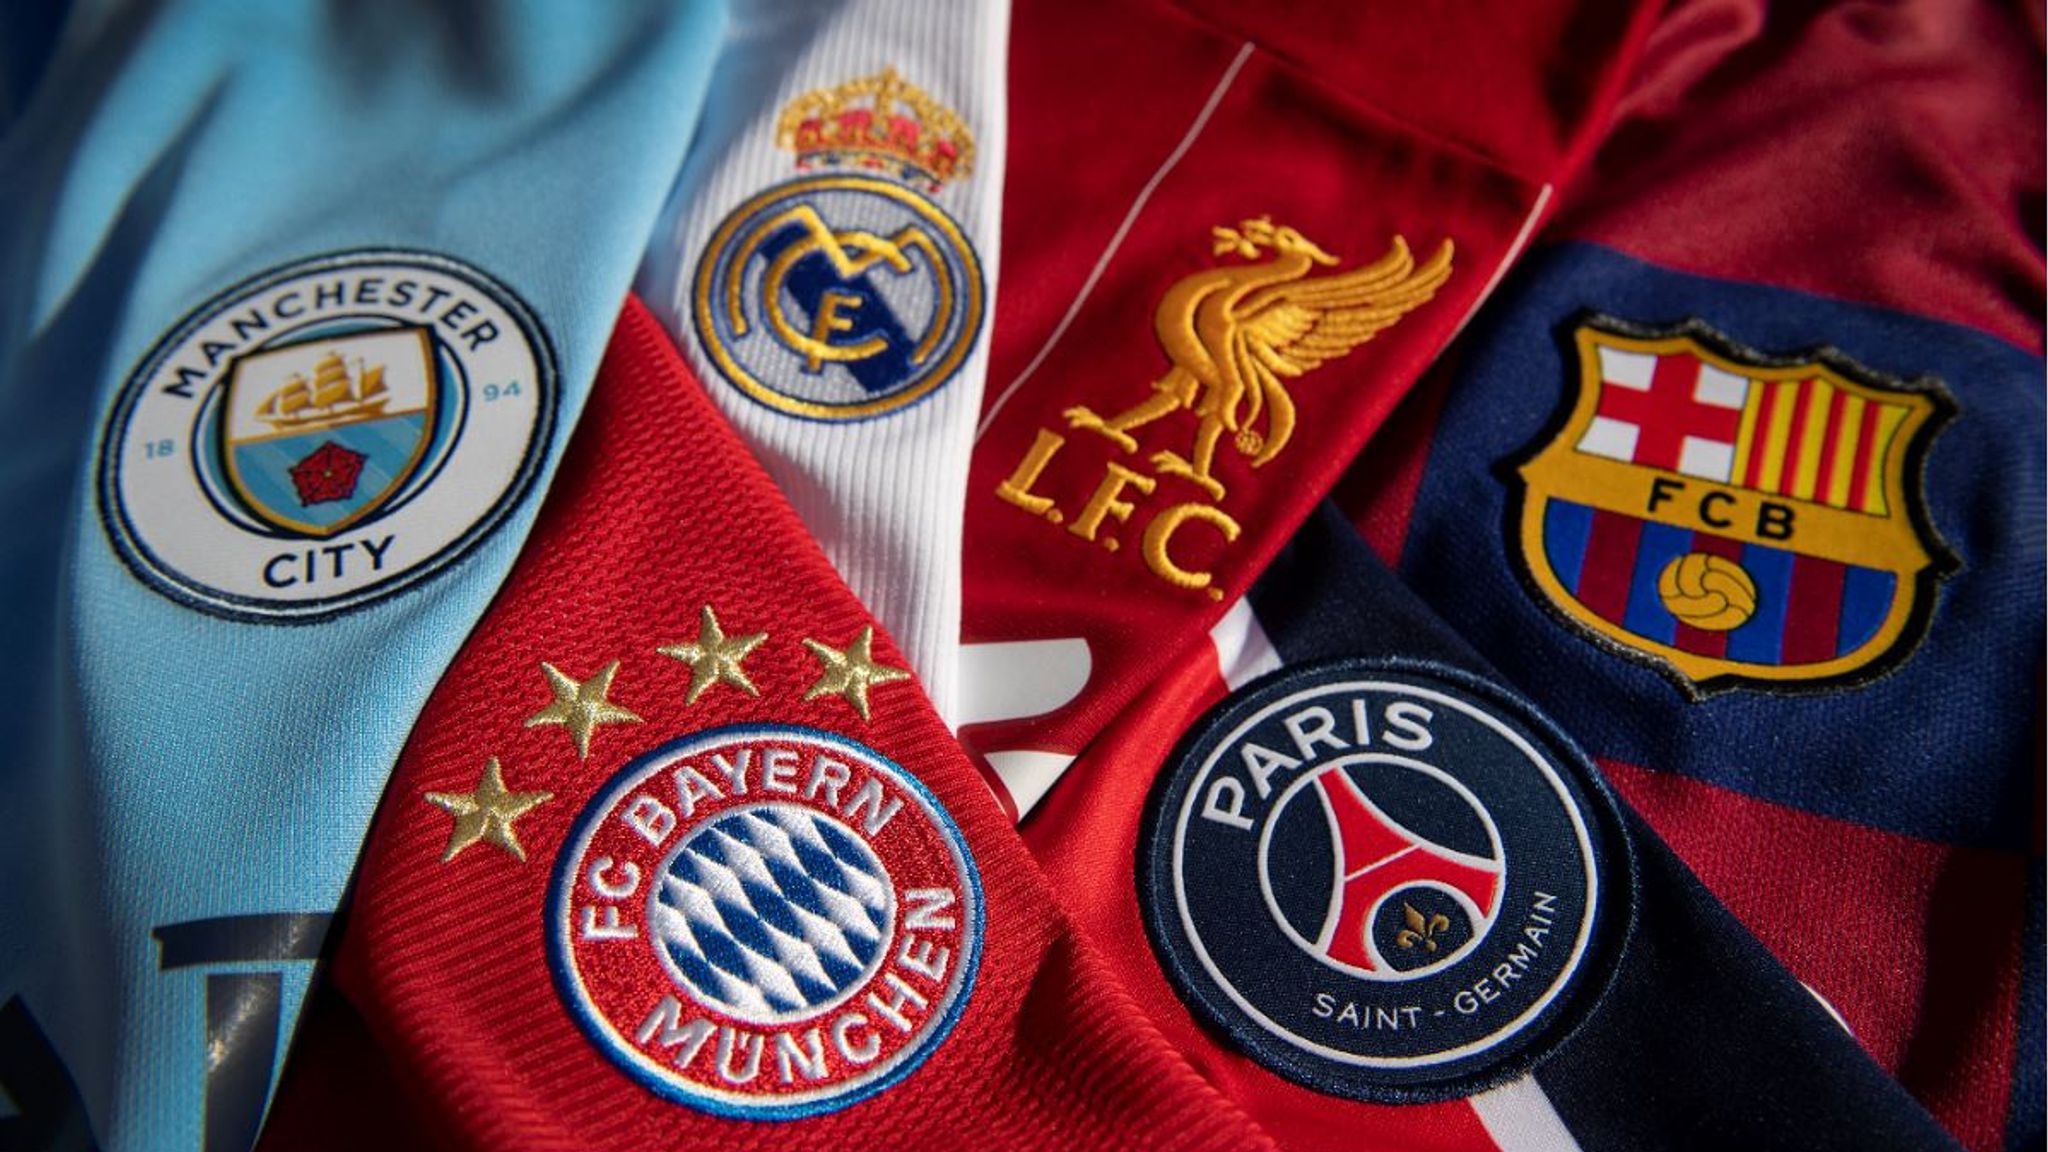 Top 5 Best Football Clubs in the World